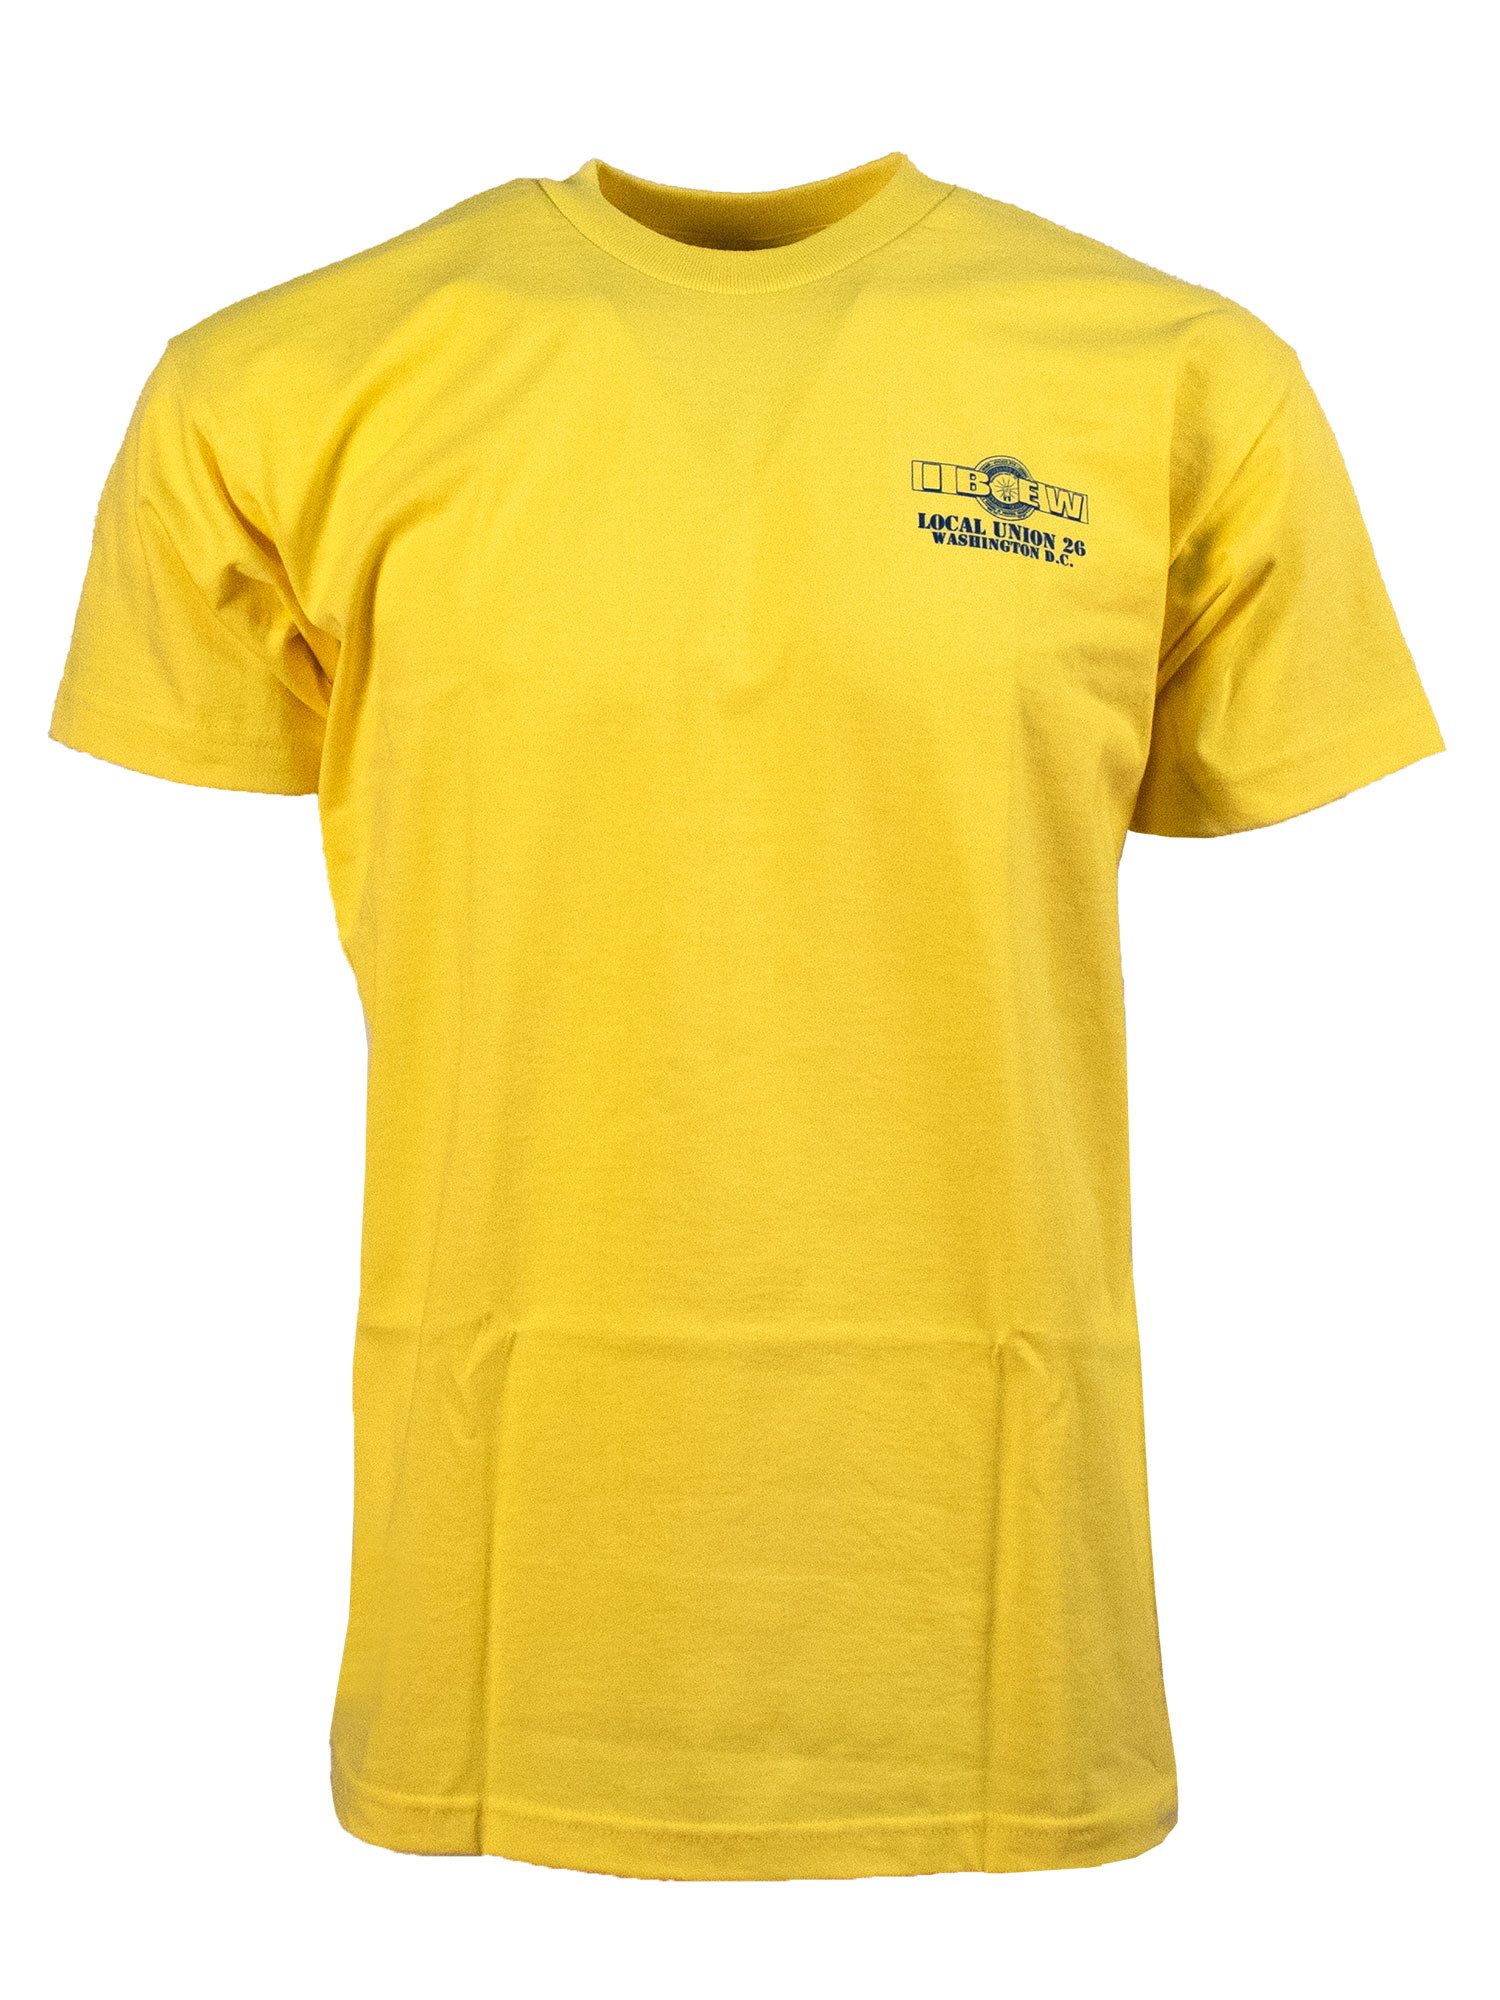 5100 Dues T-Shirt - Yellow - Frontside